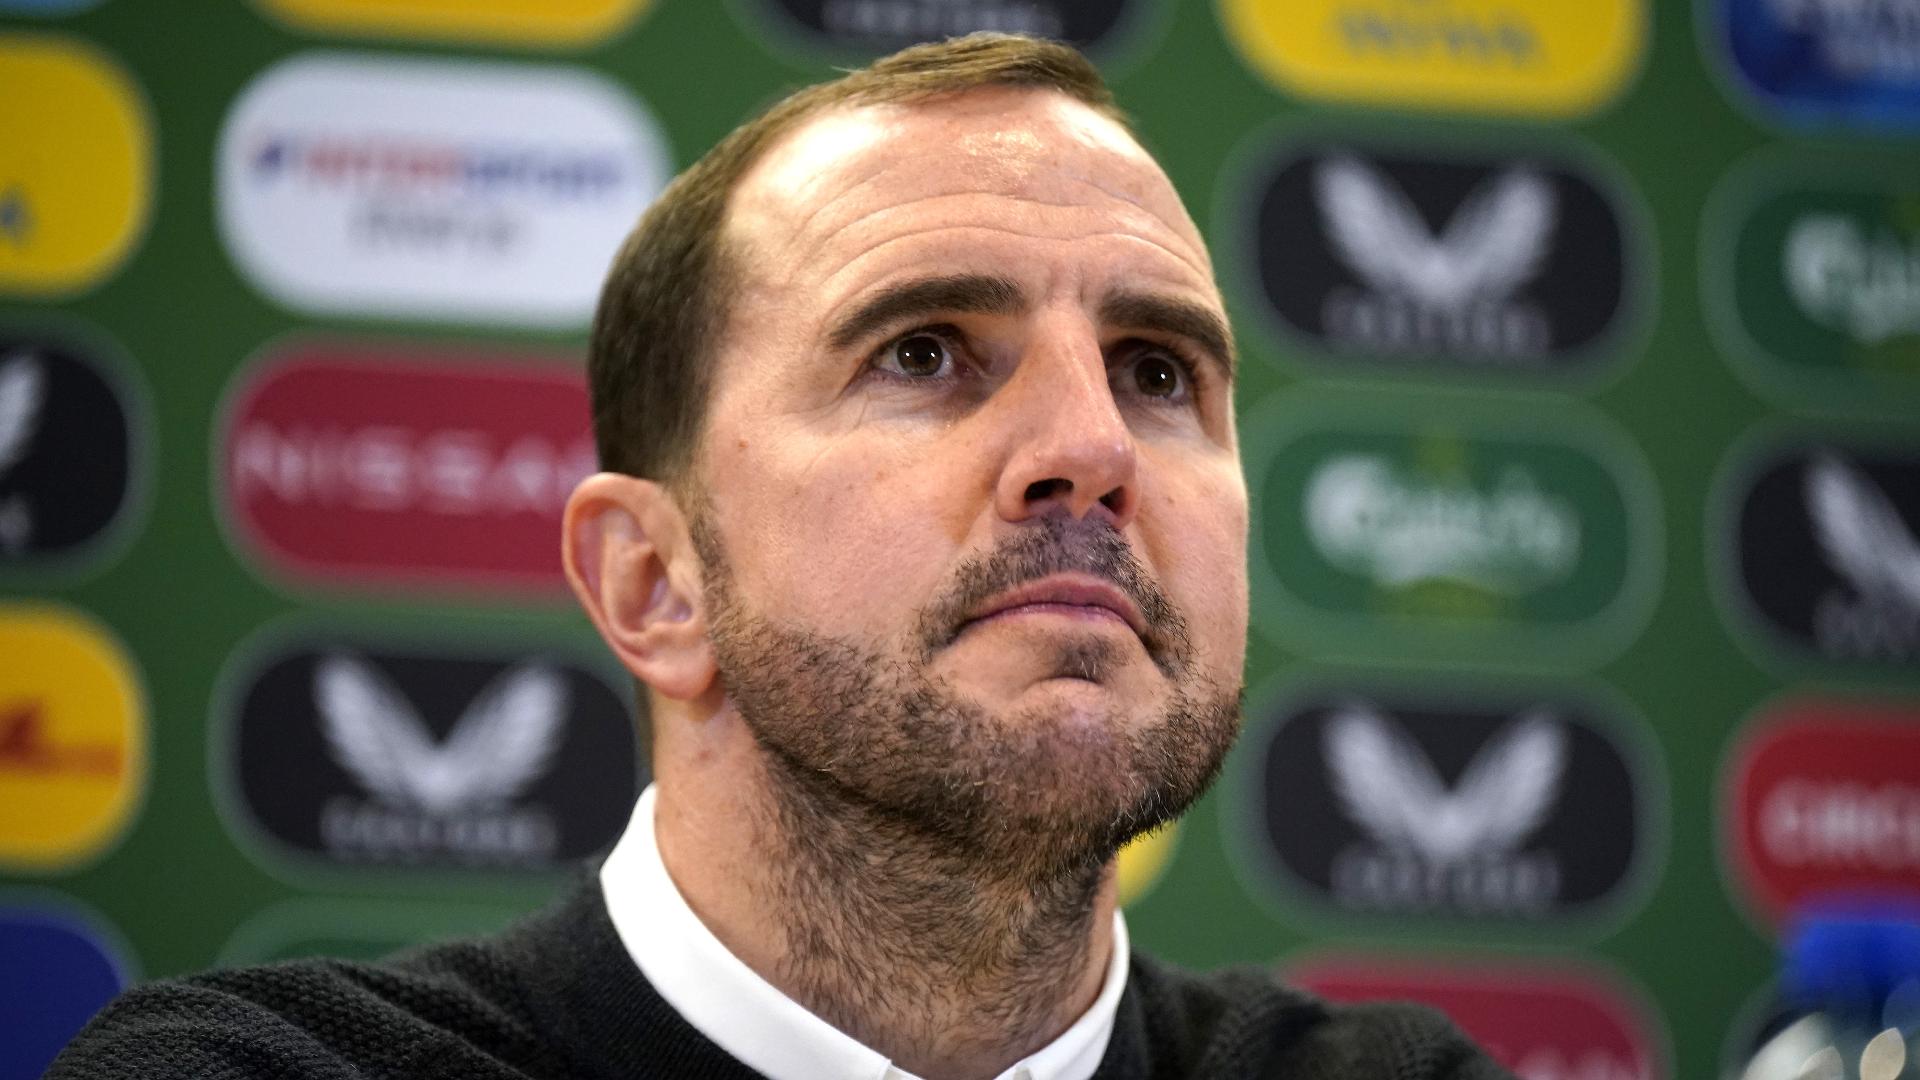 John O’Shea appears out of running to land Republic of Ireland job permanently